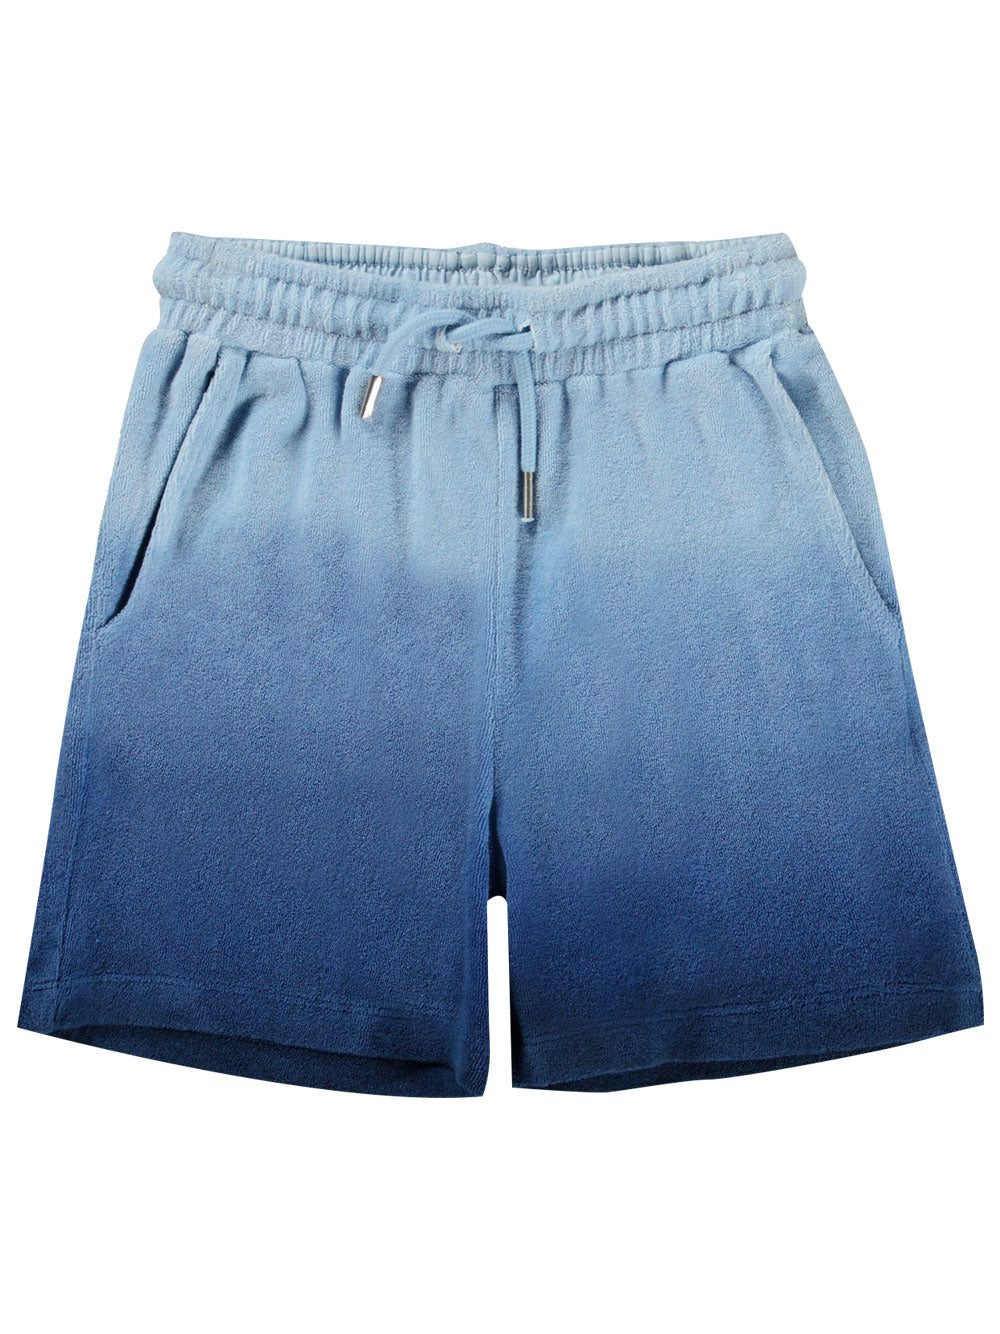 PREORDER: Abay Reef Blue Shorts